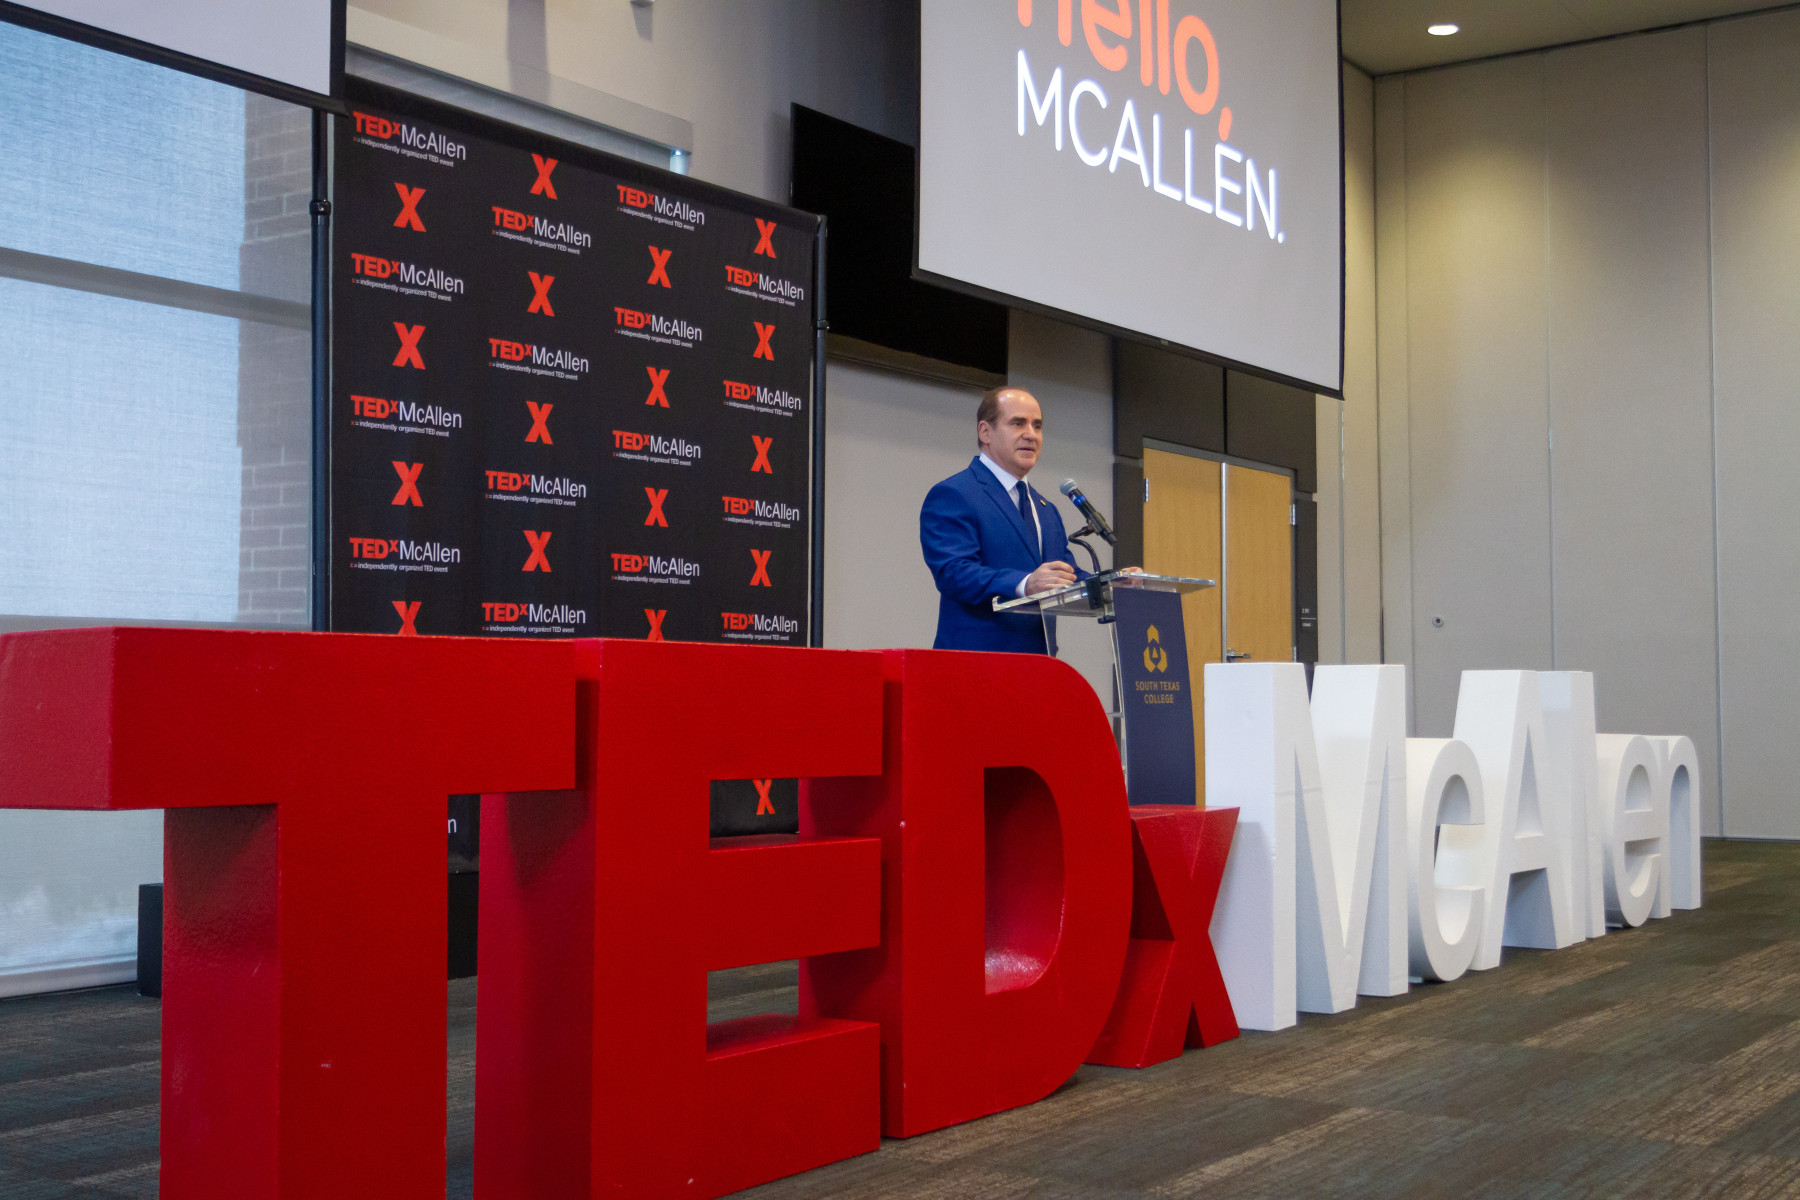 TEDx McAllen is back at STC